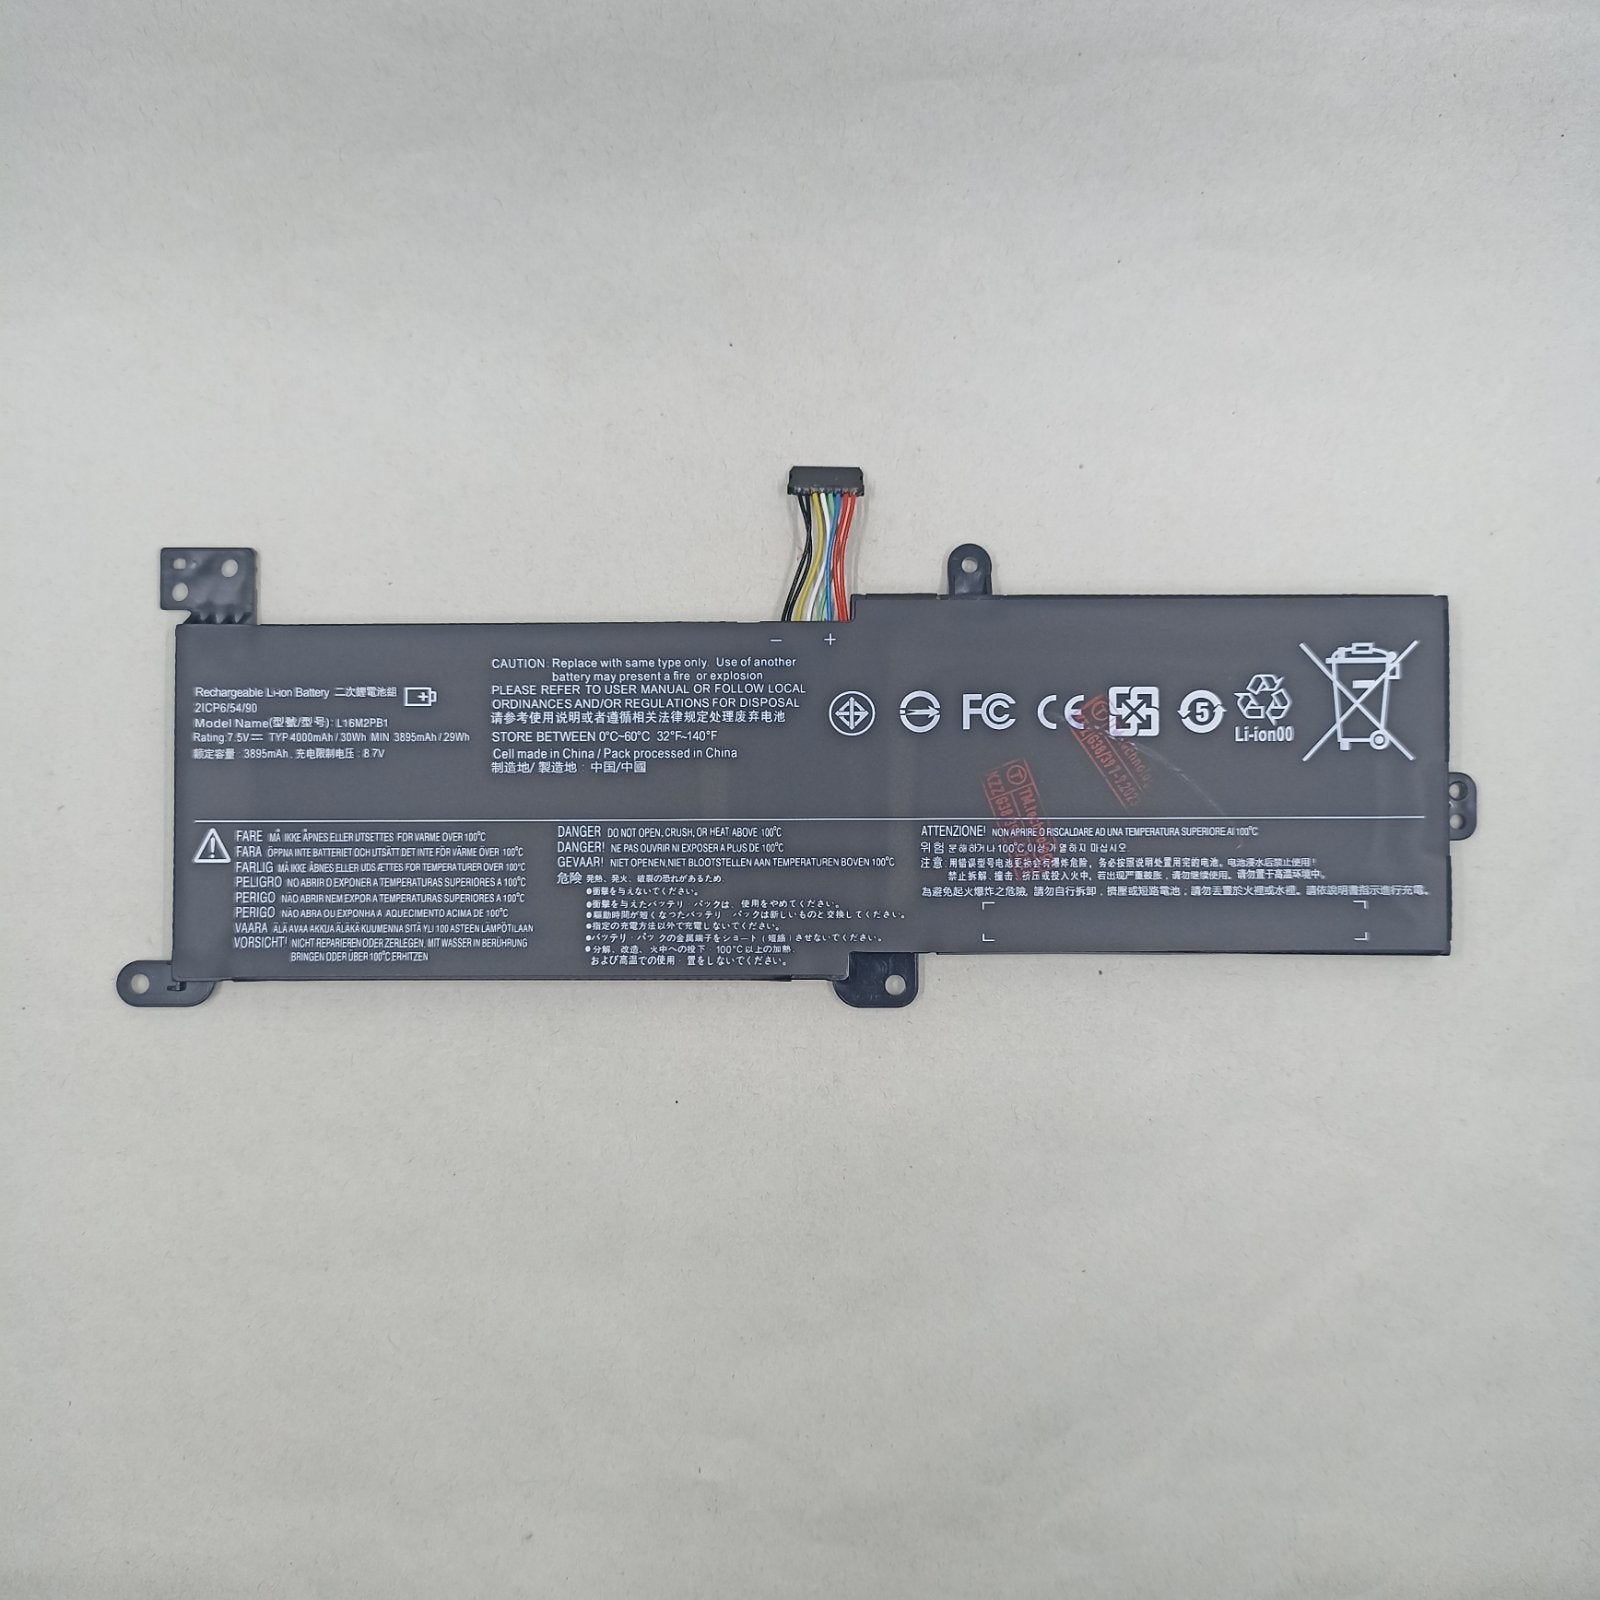 Replacement Battery for Lenovo IdeaPad 3-15IML05 A1